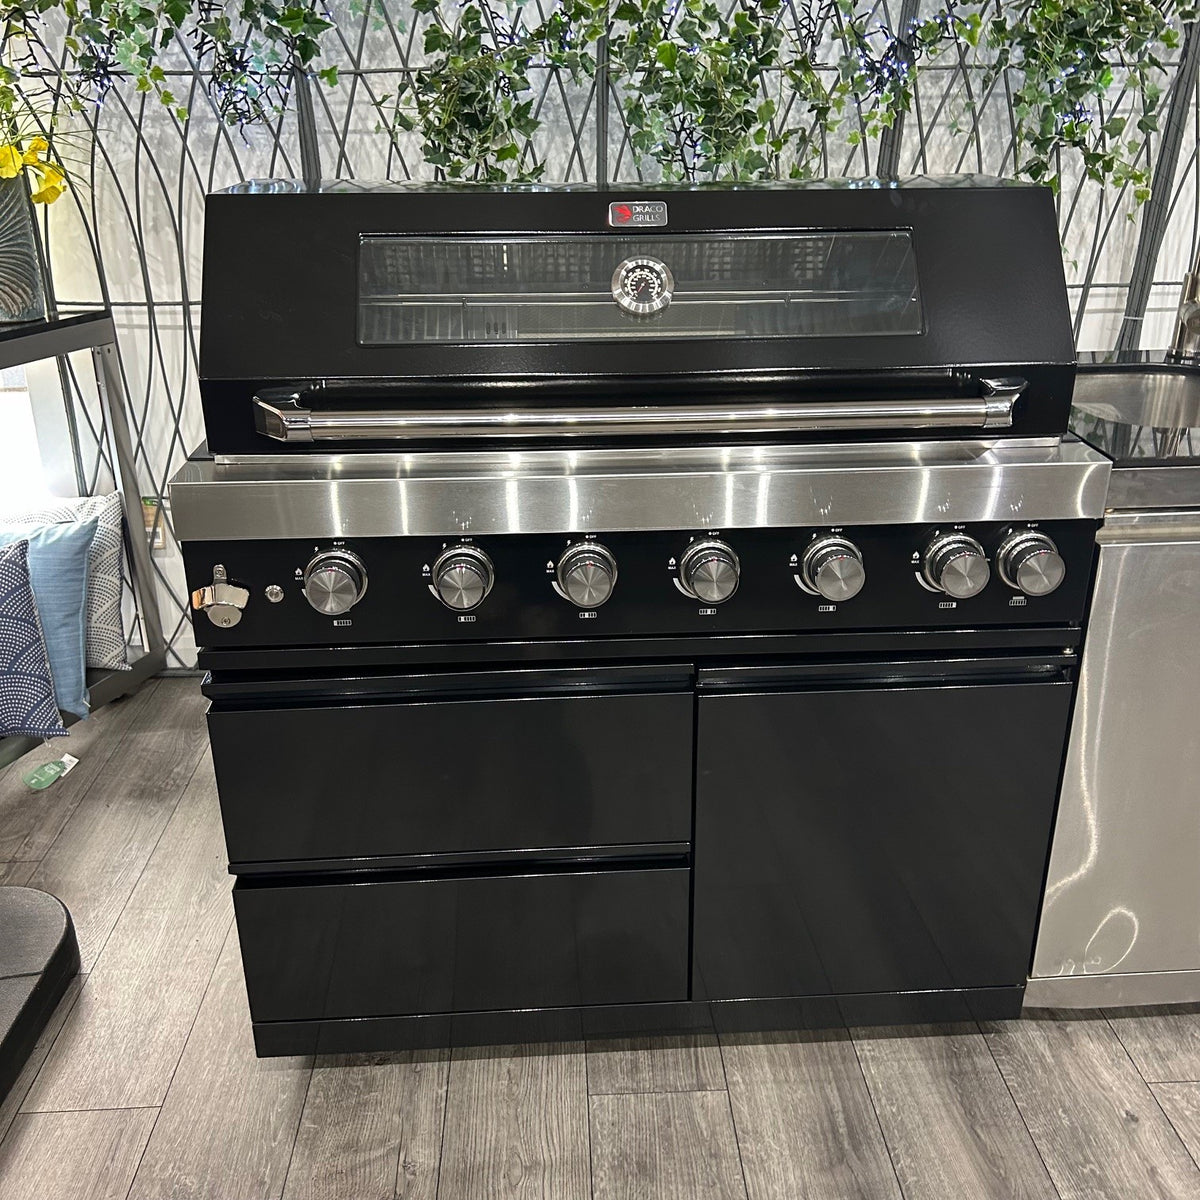 Ex Display Draco Grills 6 Burner Black Outdoor Kitchen with Stainless Steel Sink and Fridge Unit